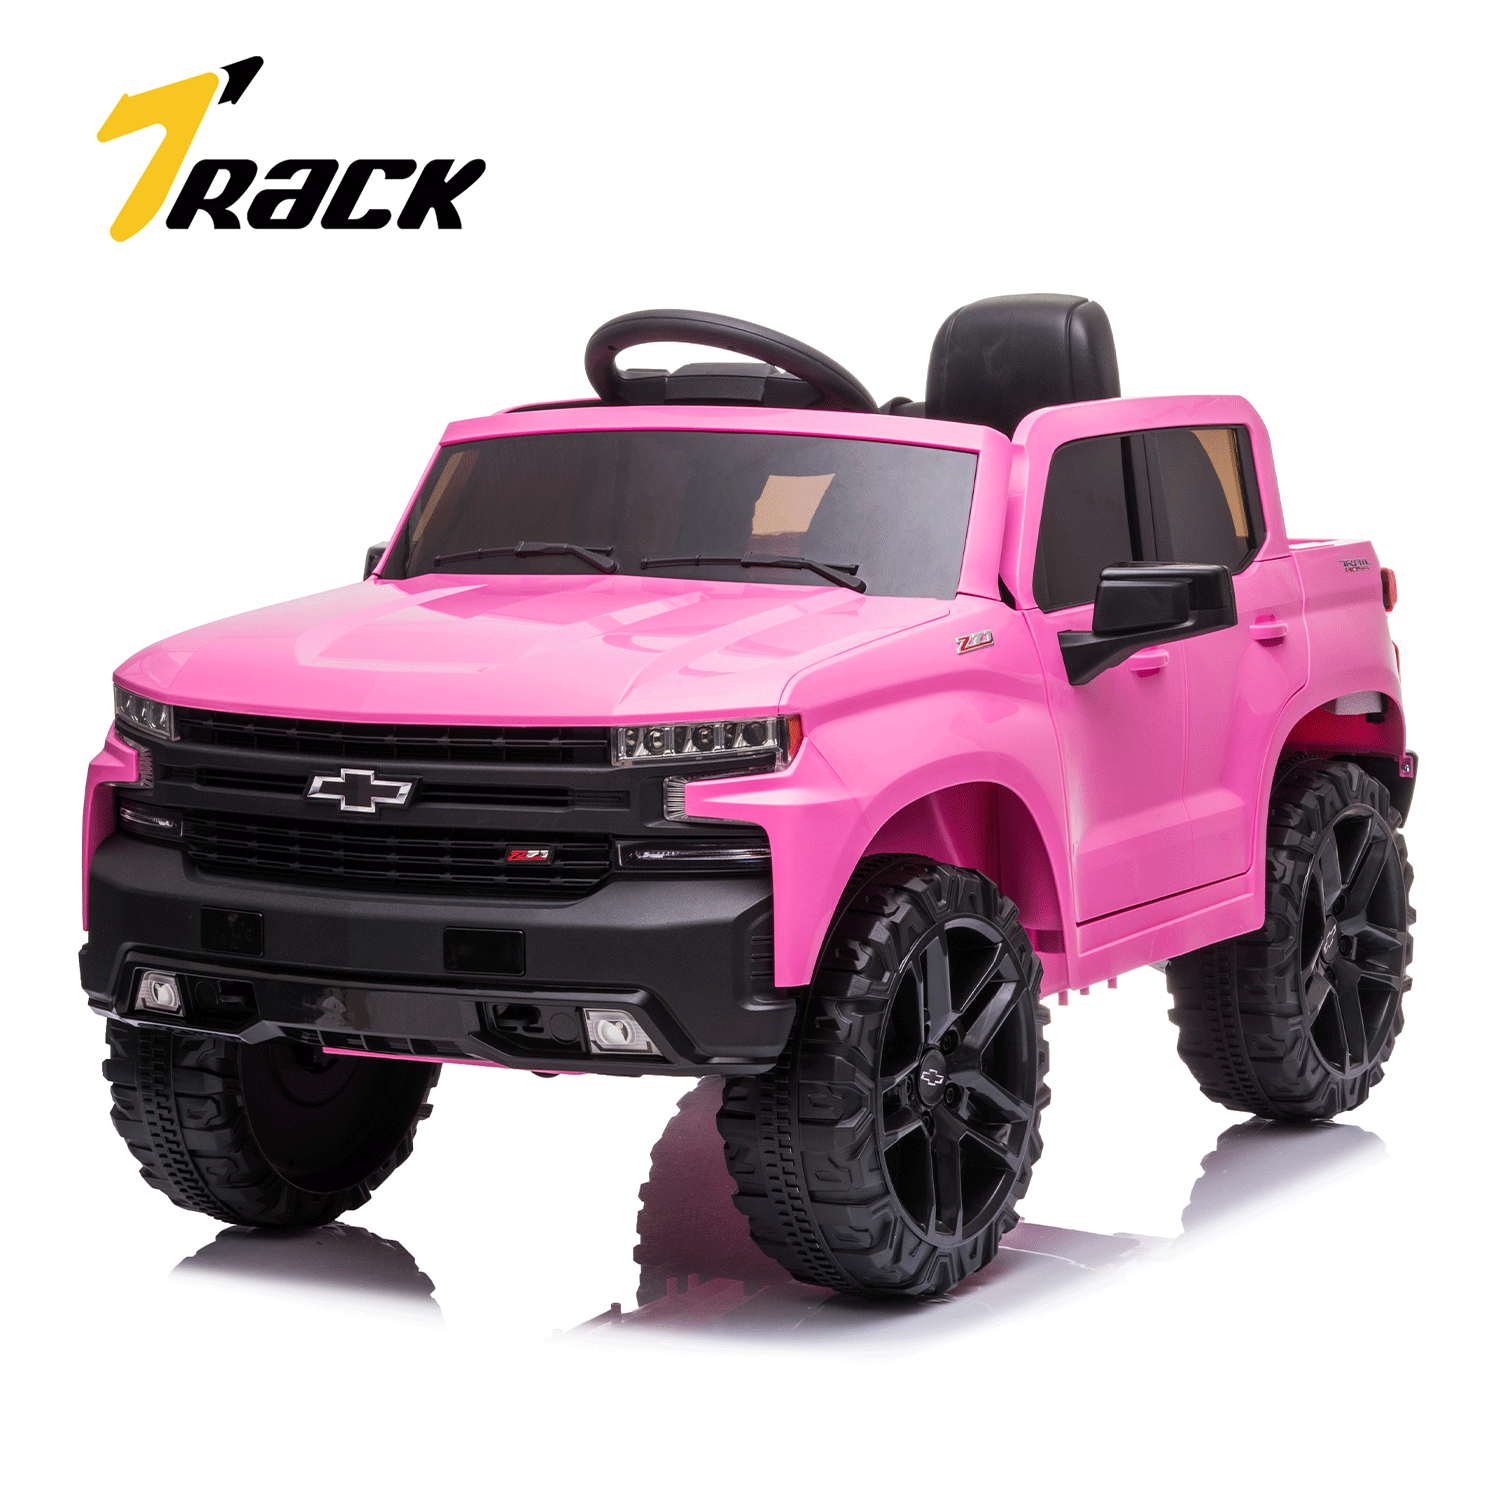 Track 7 Kids Ride on Car,12V Battery Powered Chevrolet Silverado Electric Car for Boys Girls,Ride on Truck with Remote Control,Kids Electric Vehicle with Music,Lights,12V Ride on Toy Car,Pink